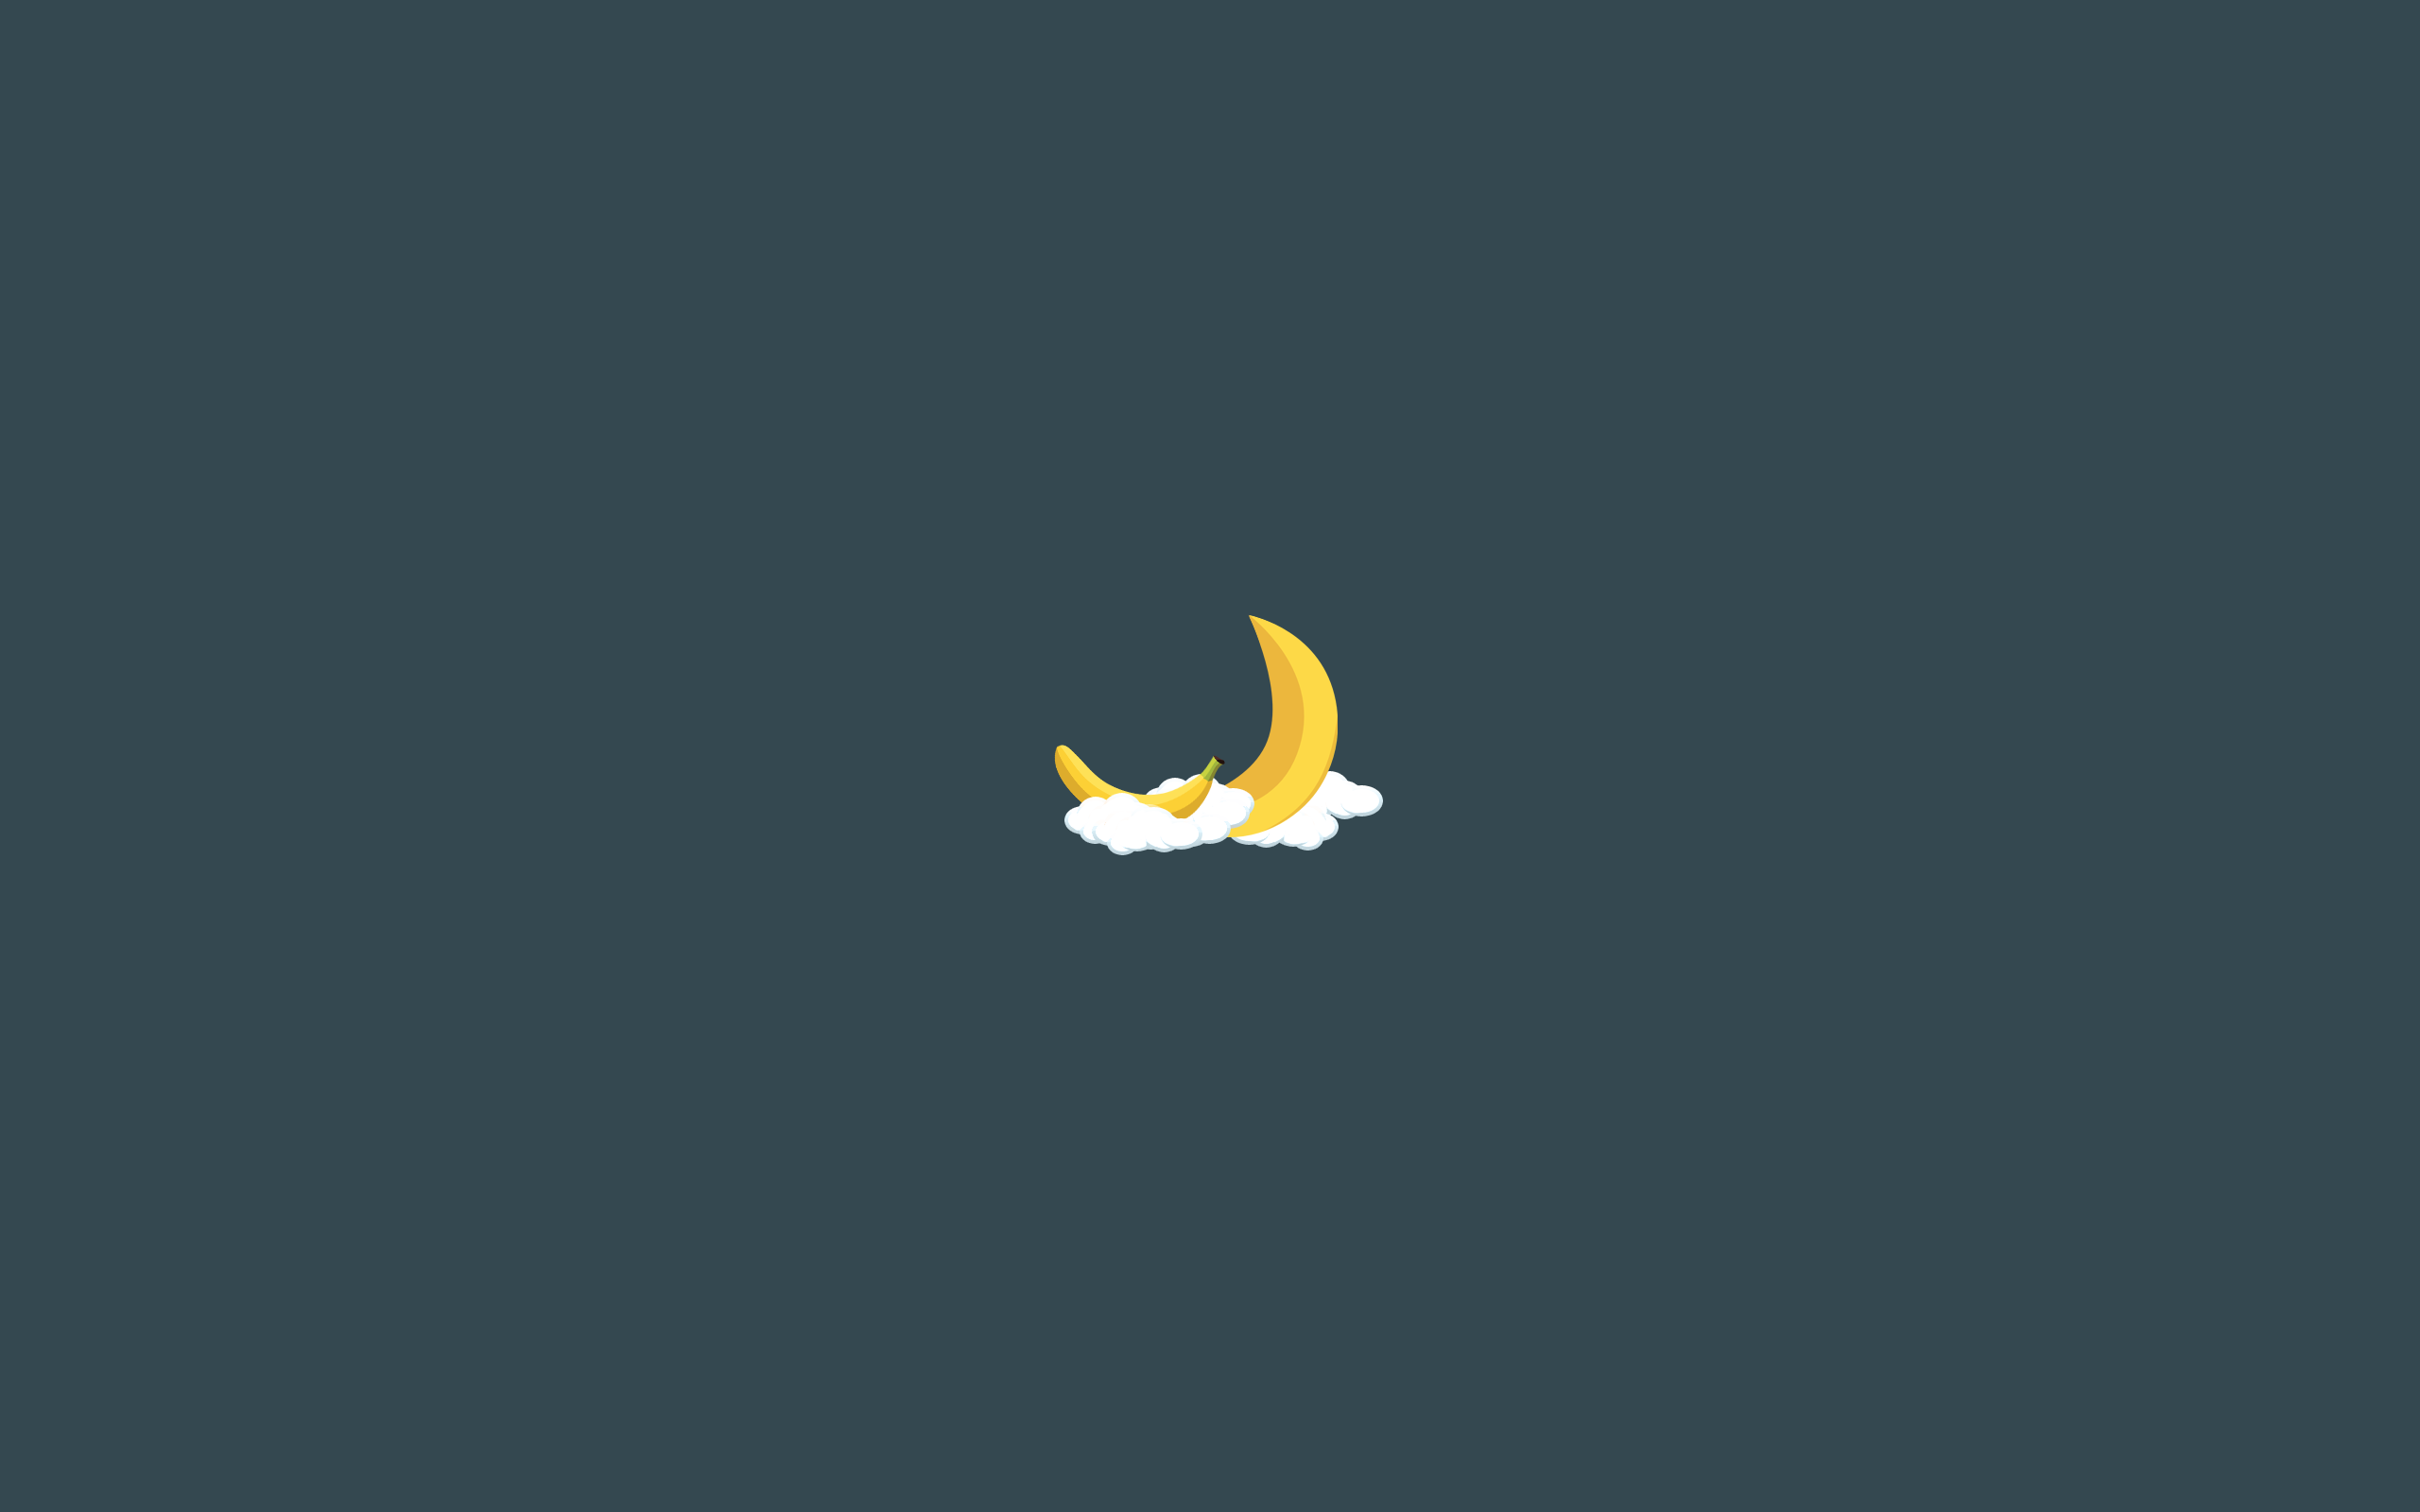 Humor Minimalism Simple Background Moon Bananas Clouds Moon Phases 2560x1600